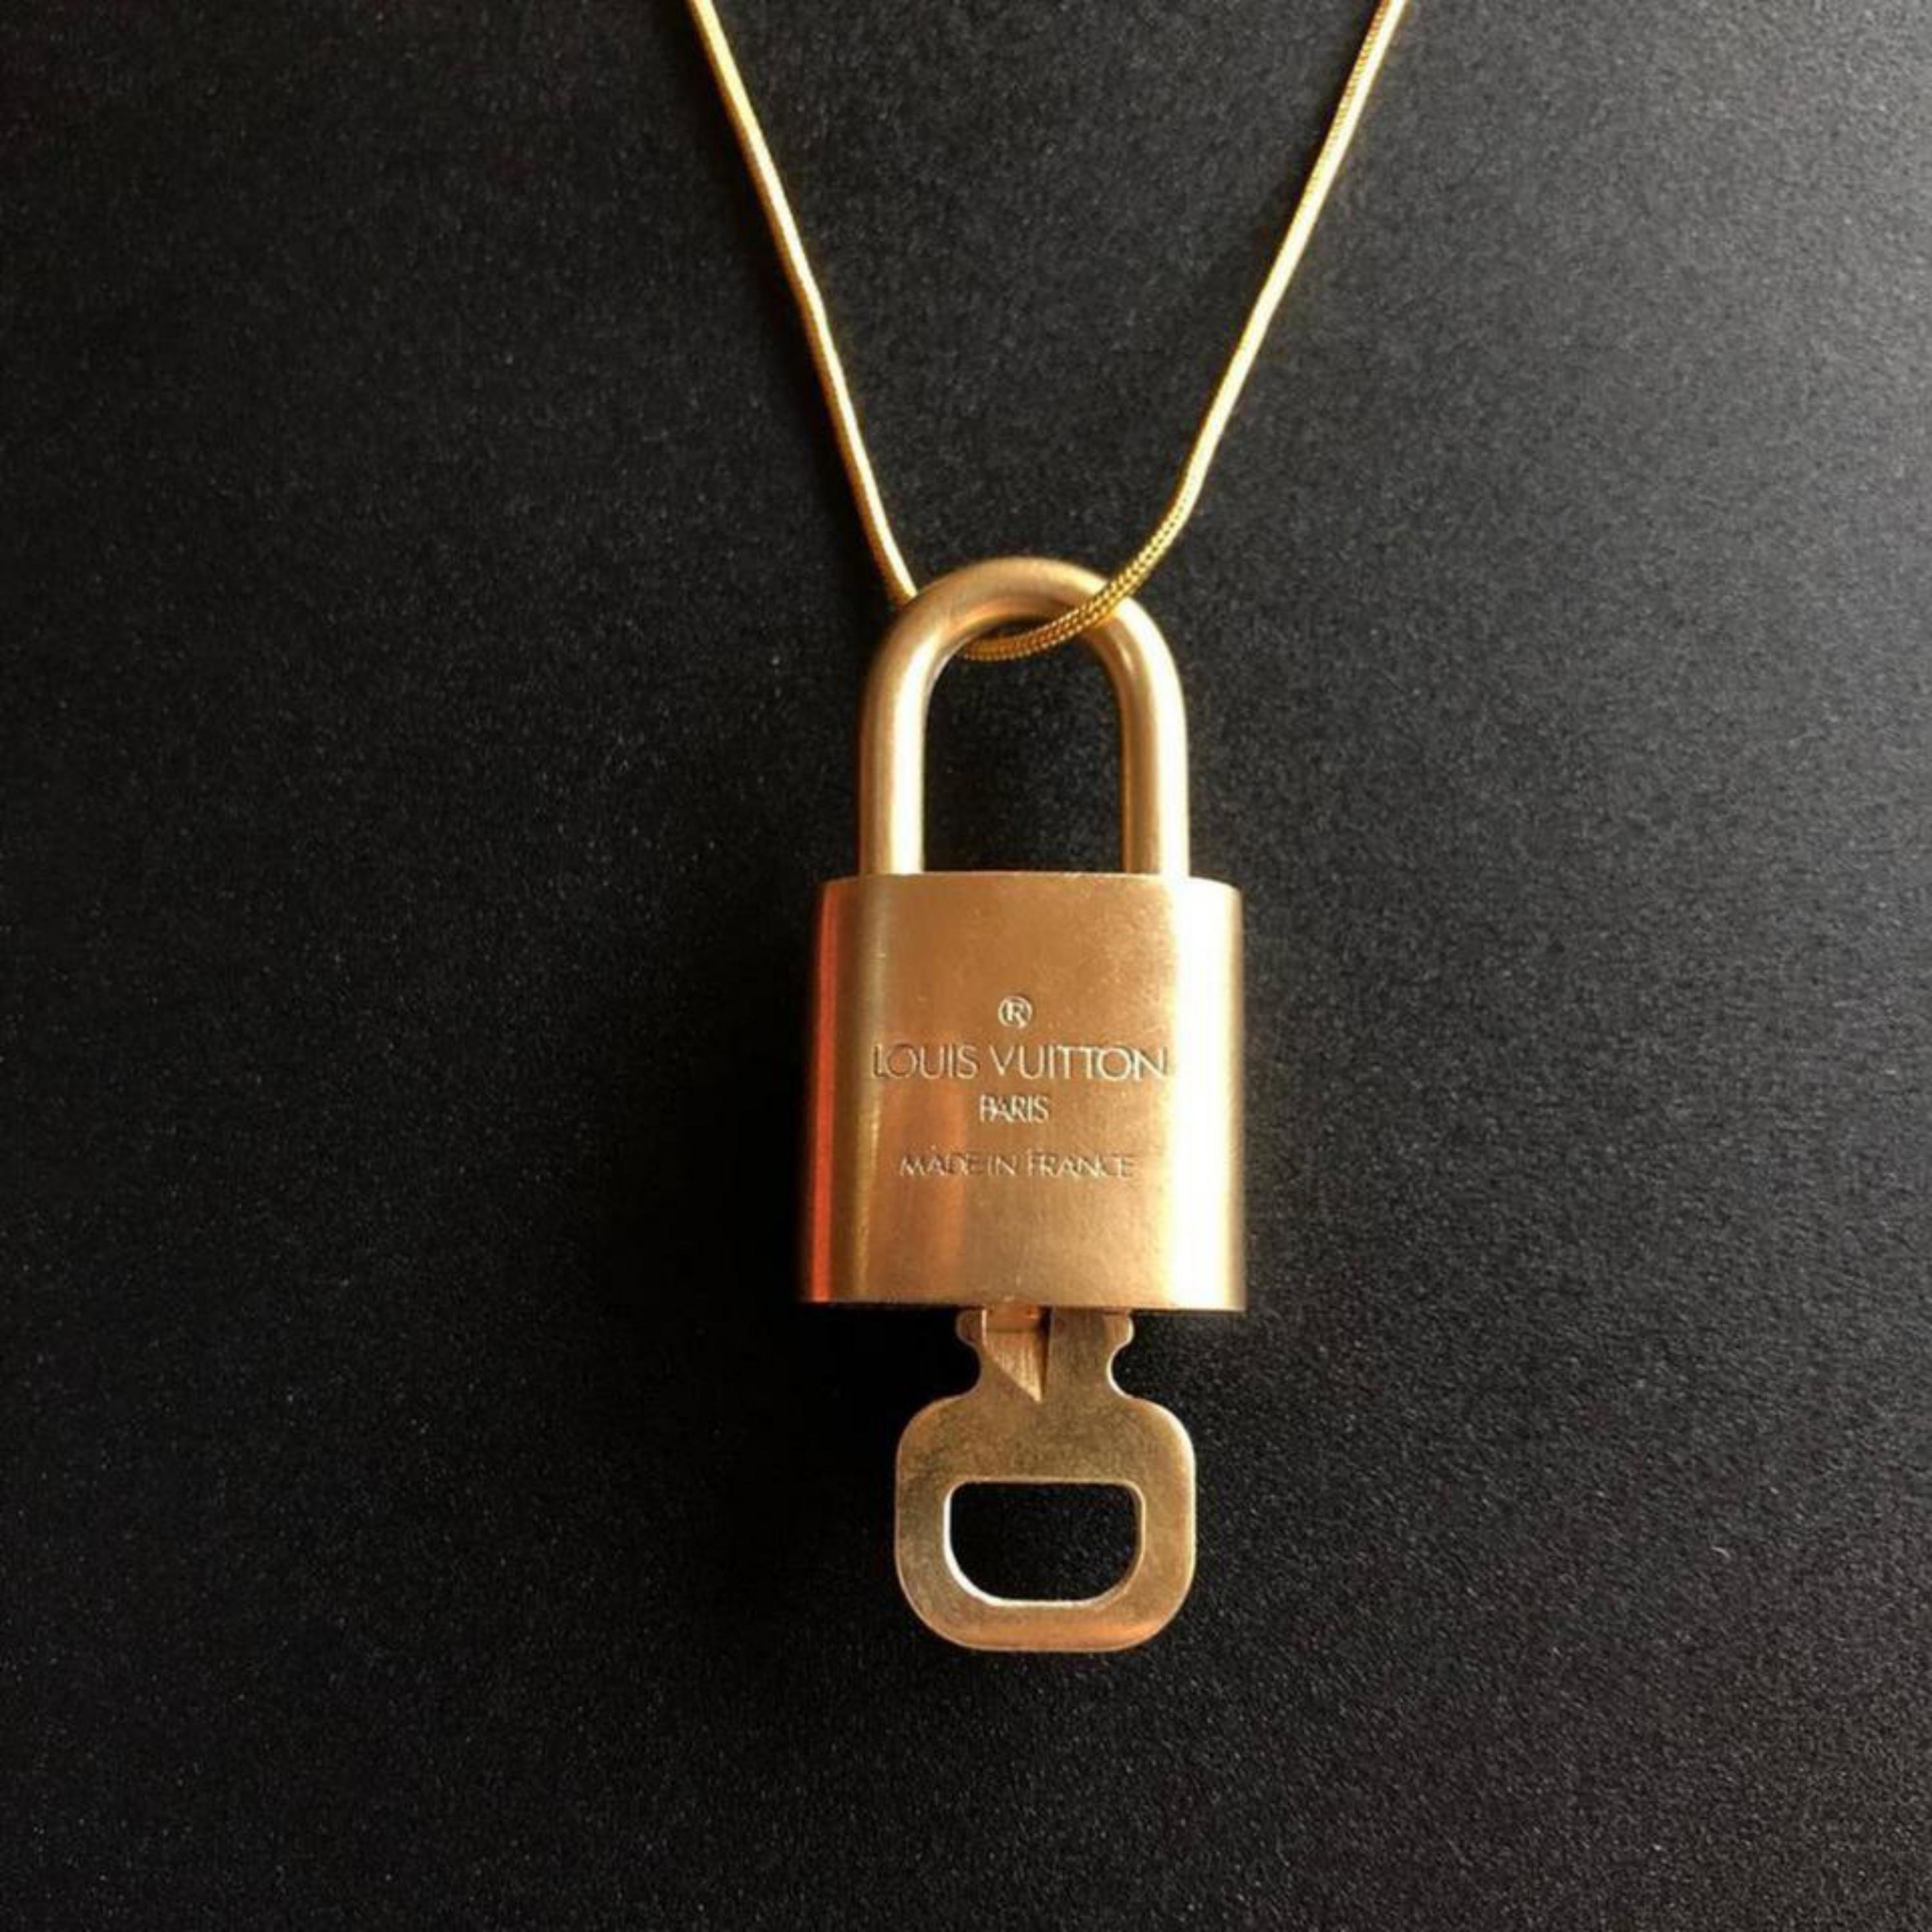 Louis Vuitton Gold Single Key Lock Pad Lock and Key 867695 For Sale 6